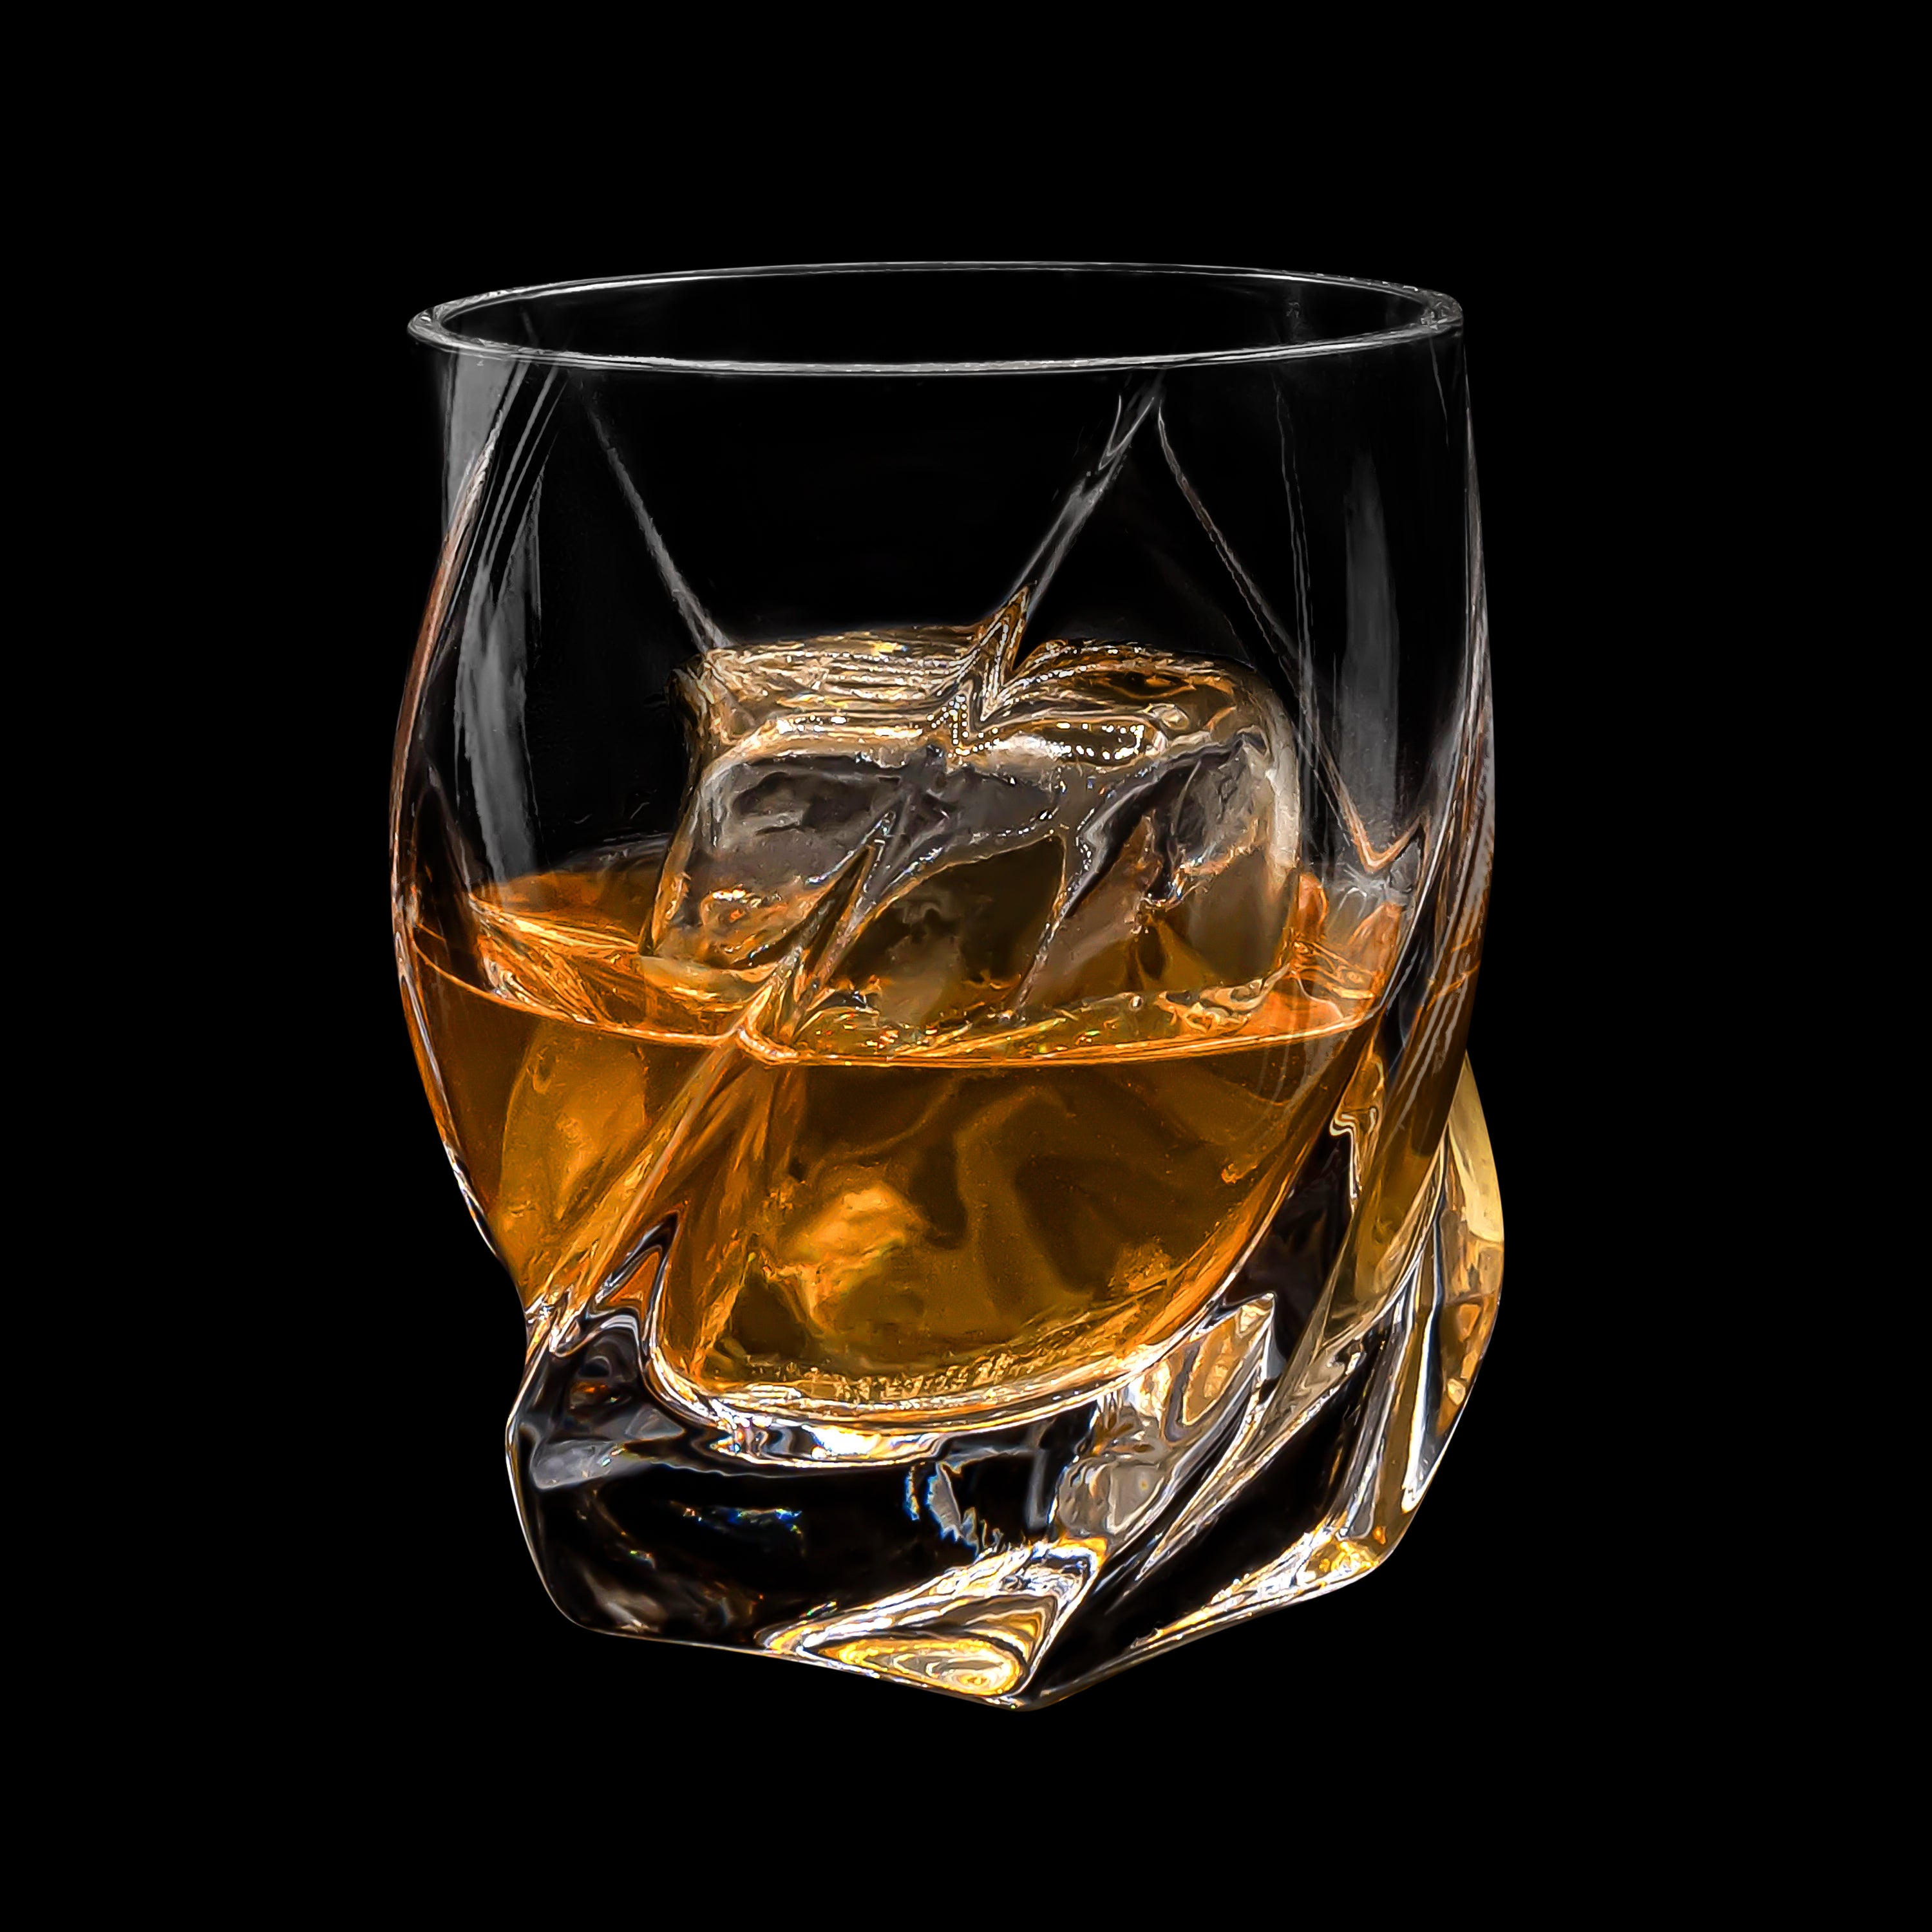 Whiskey Glasses Set of 2 with Matching Ice Ball Molds, Bourbon Glass